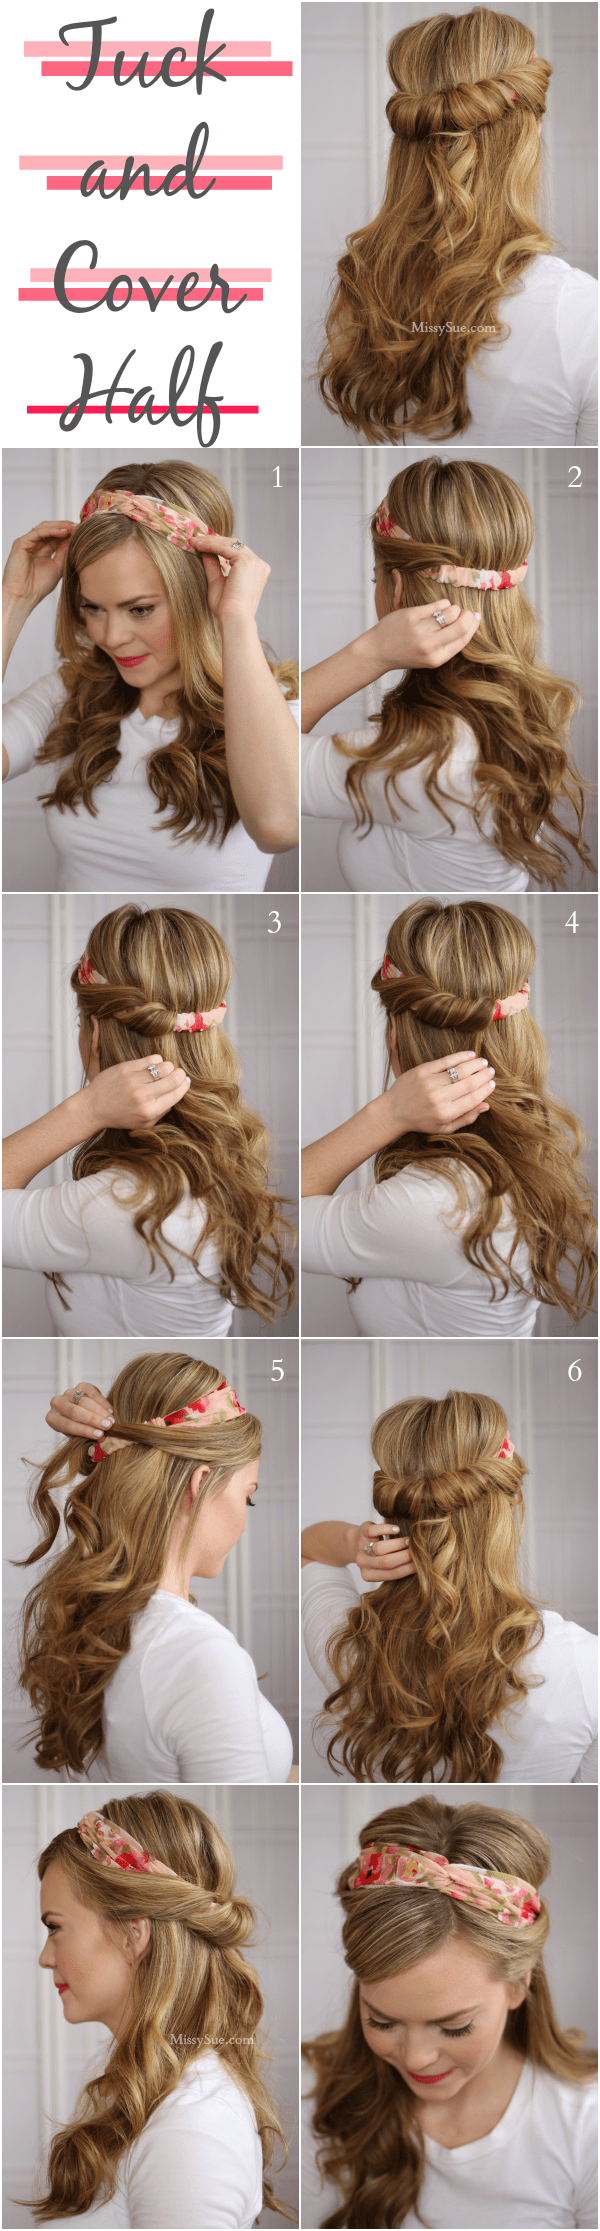 Top 10 Lazy Girl Hairstyle Tips That You Can Make It For Less Than a Minute